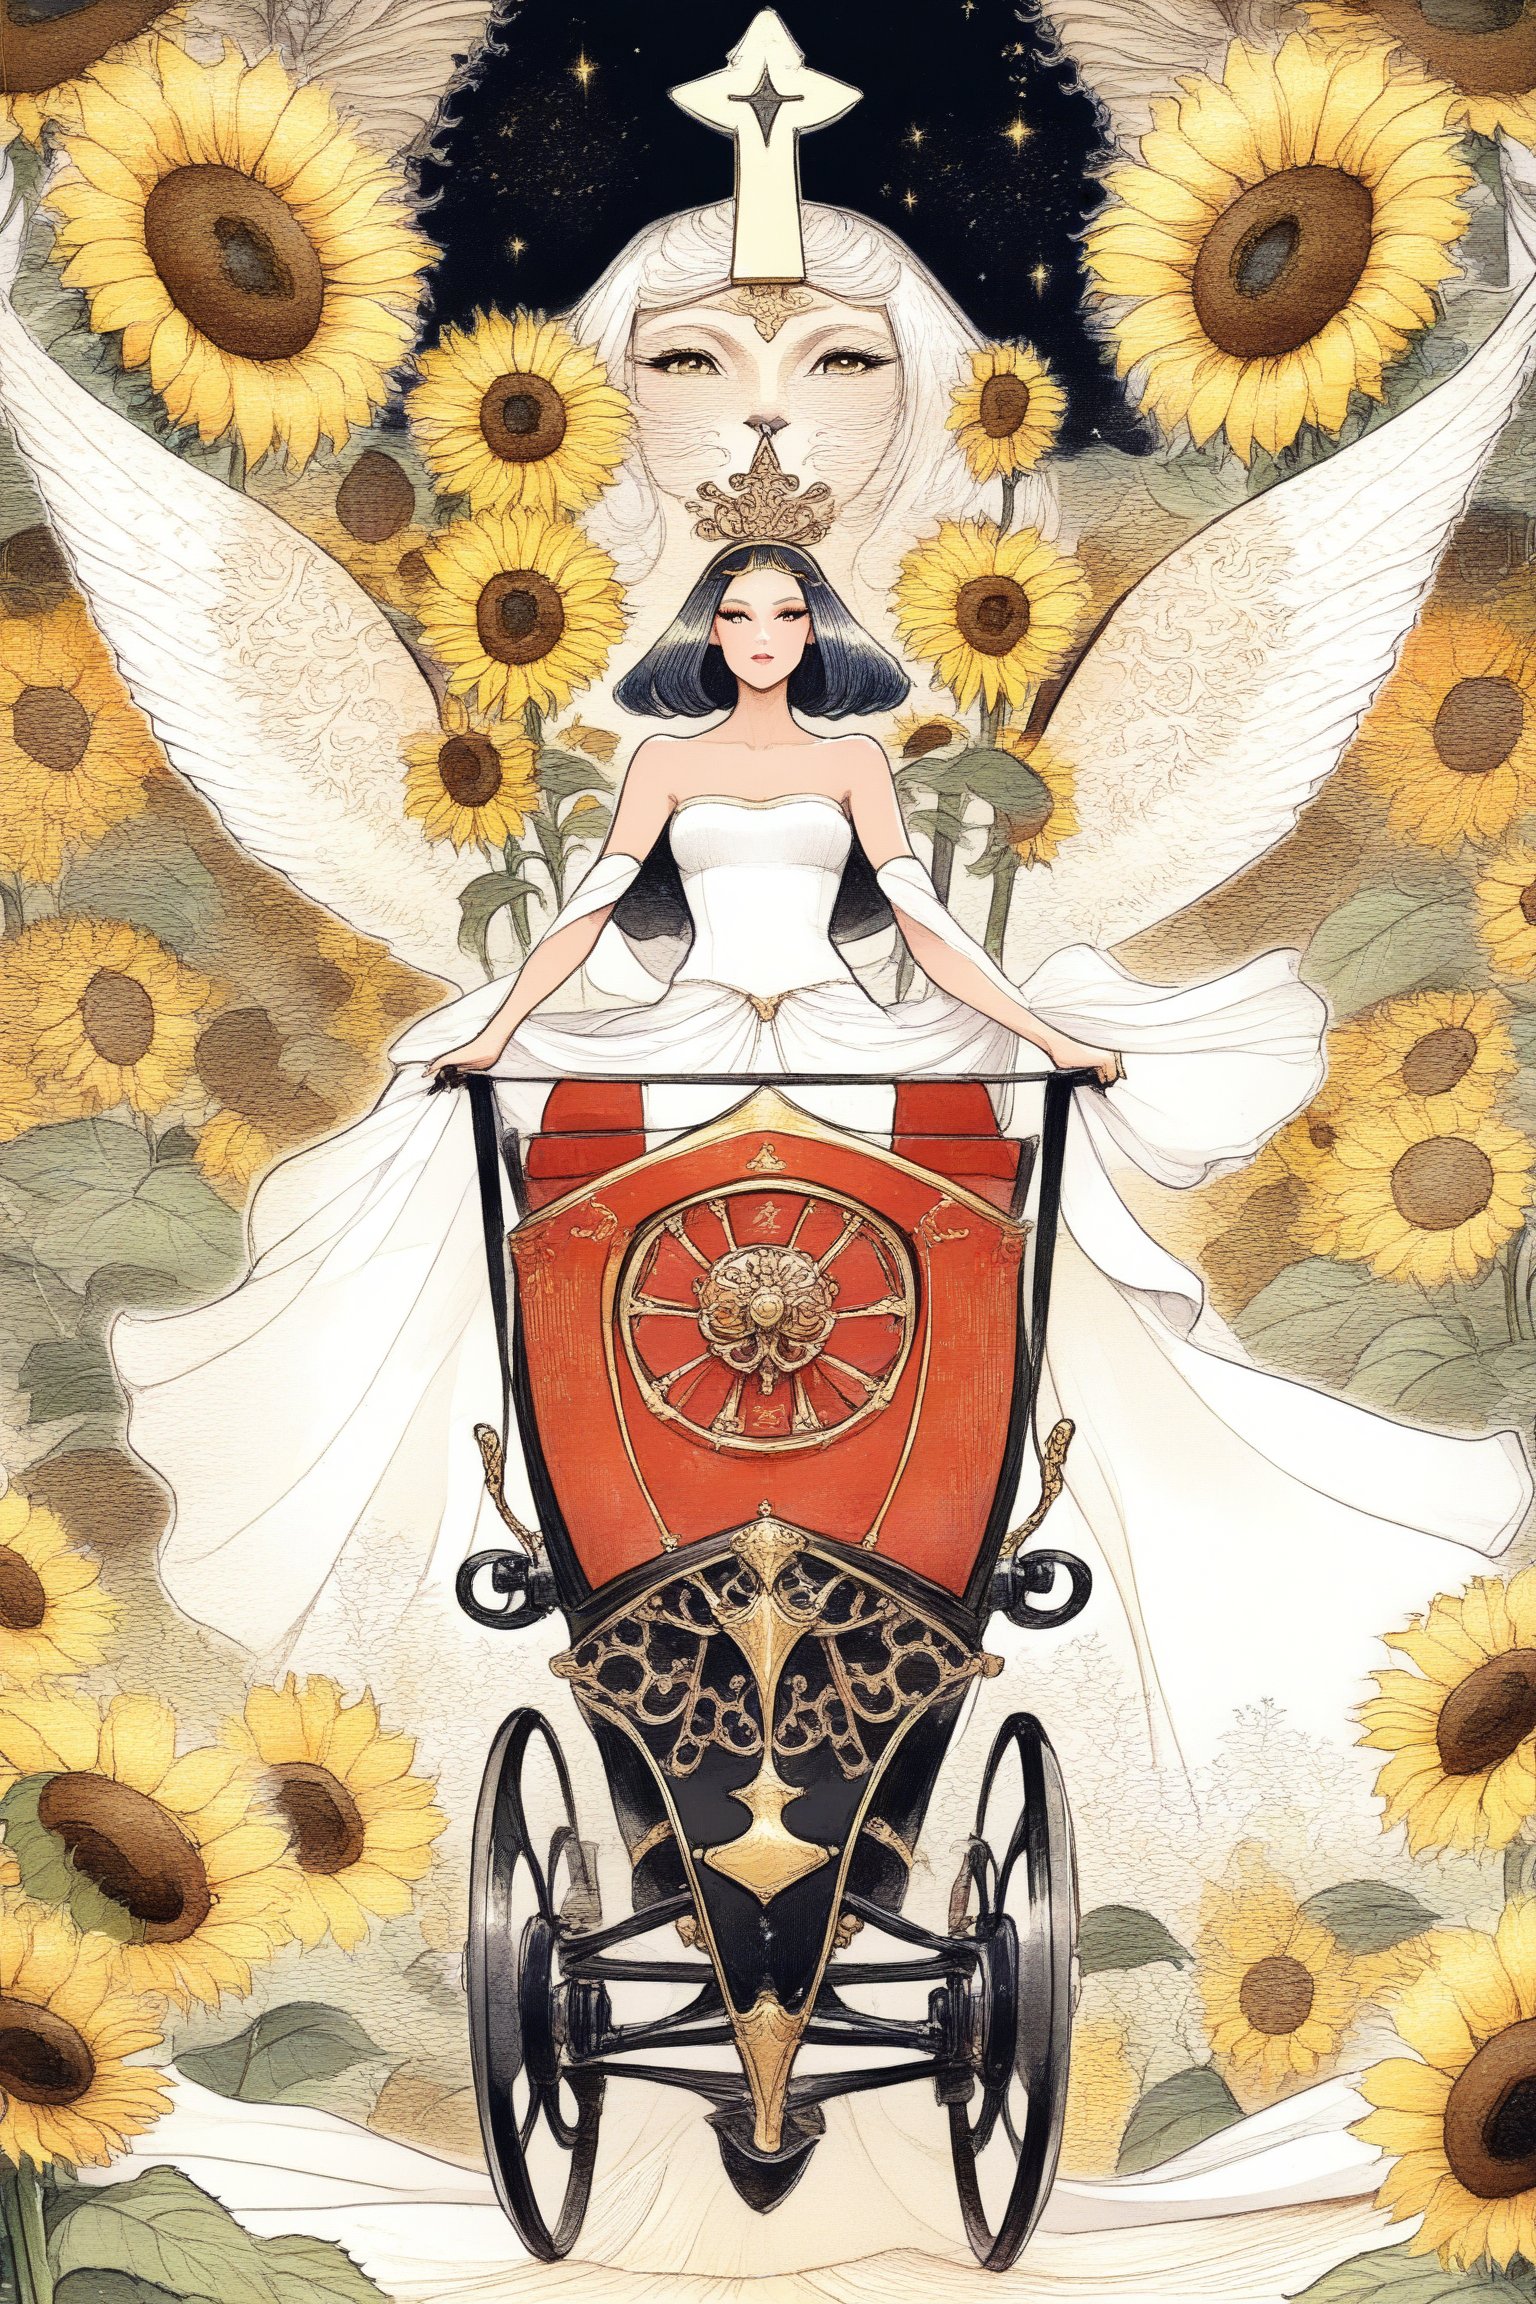 A warrior on a chariot pulled by two sphinxes, one white and one black, symbolizing victory and control, fractal art (tarot card design), botanical illustration, sunflowers, classic and elegant flourish, Lofi art style, vintage, best quality, masterpiece, extremely detailed and intricate details, fractal art (tarot card design), botanical illustration, sunflowers, classic and elegant flourish, Lofi artistic style, vintage, [(text that says "EL LOCO")], best quality, masterpiece, extremely detailed and intricate details,